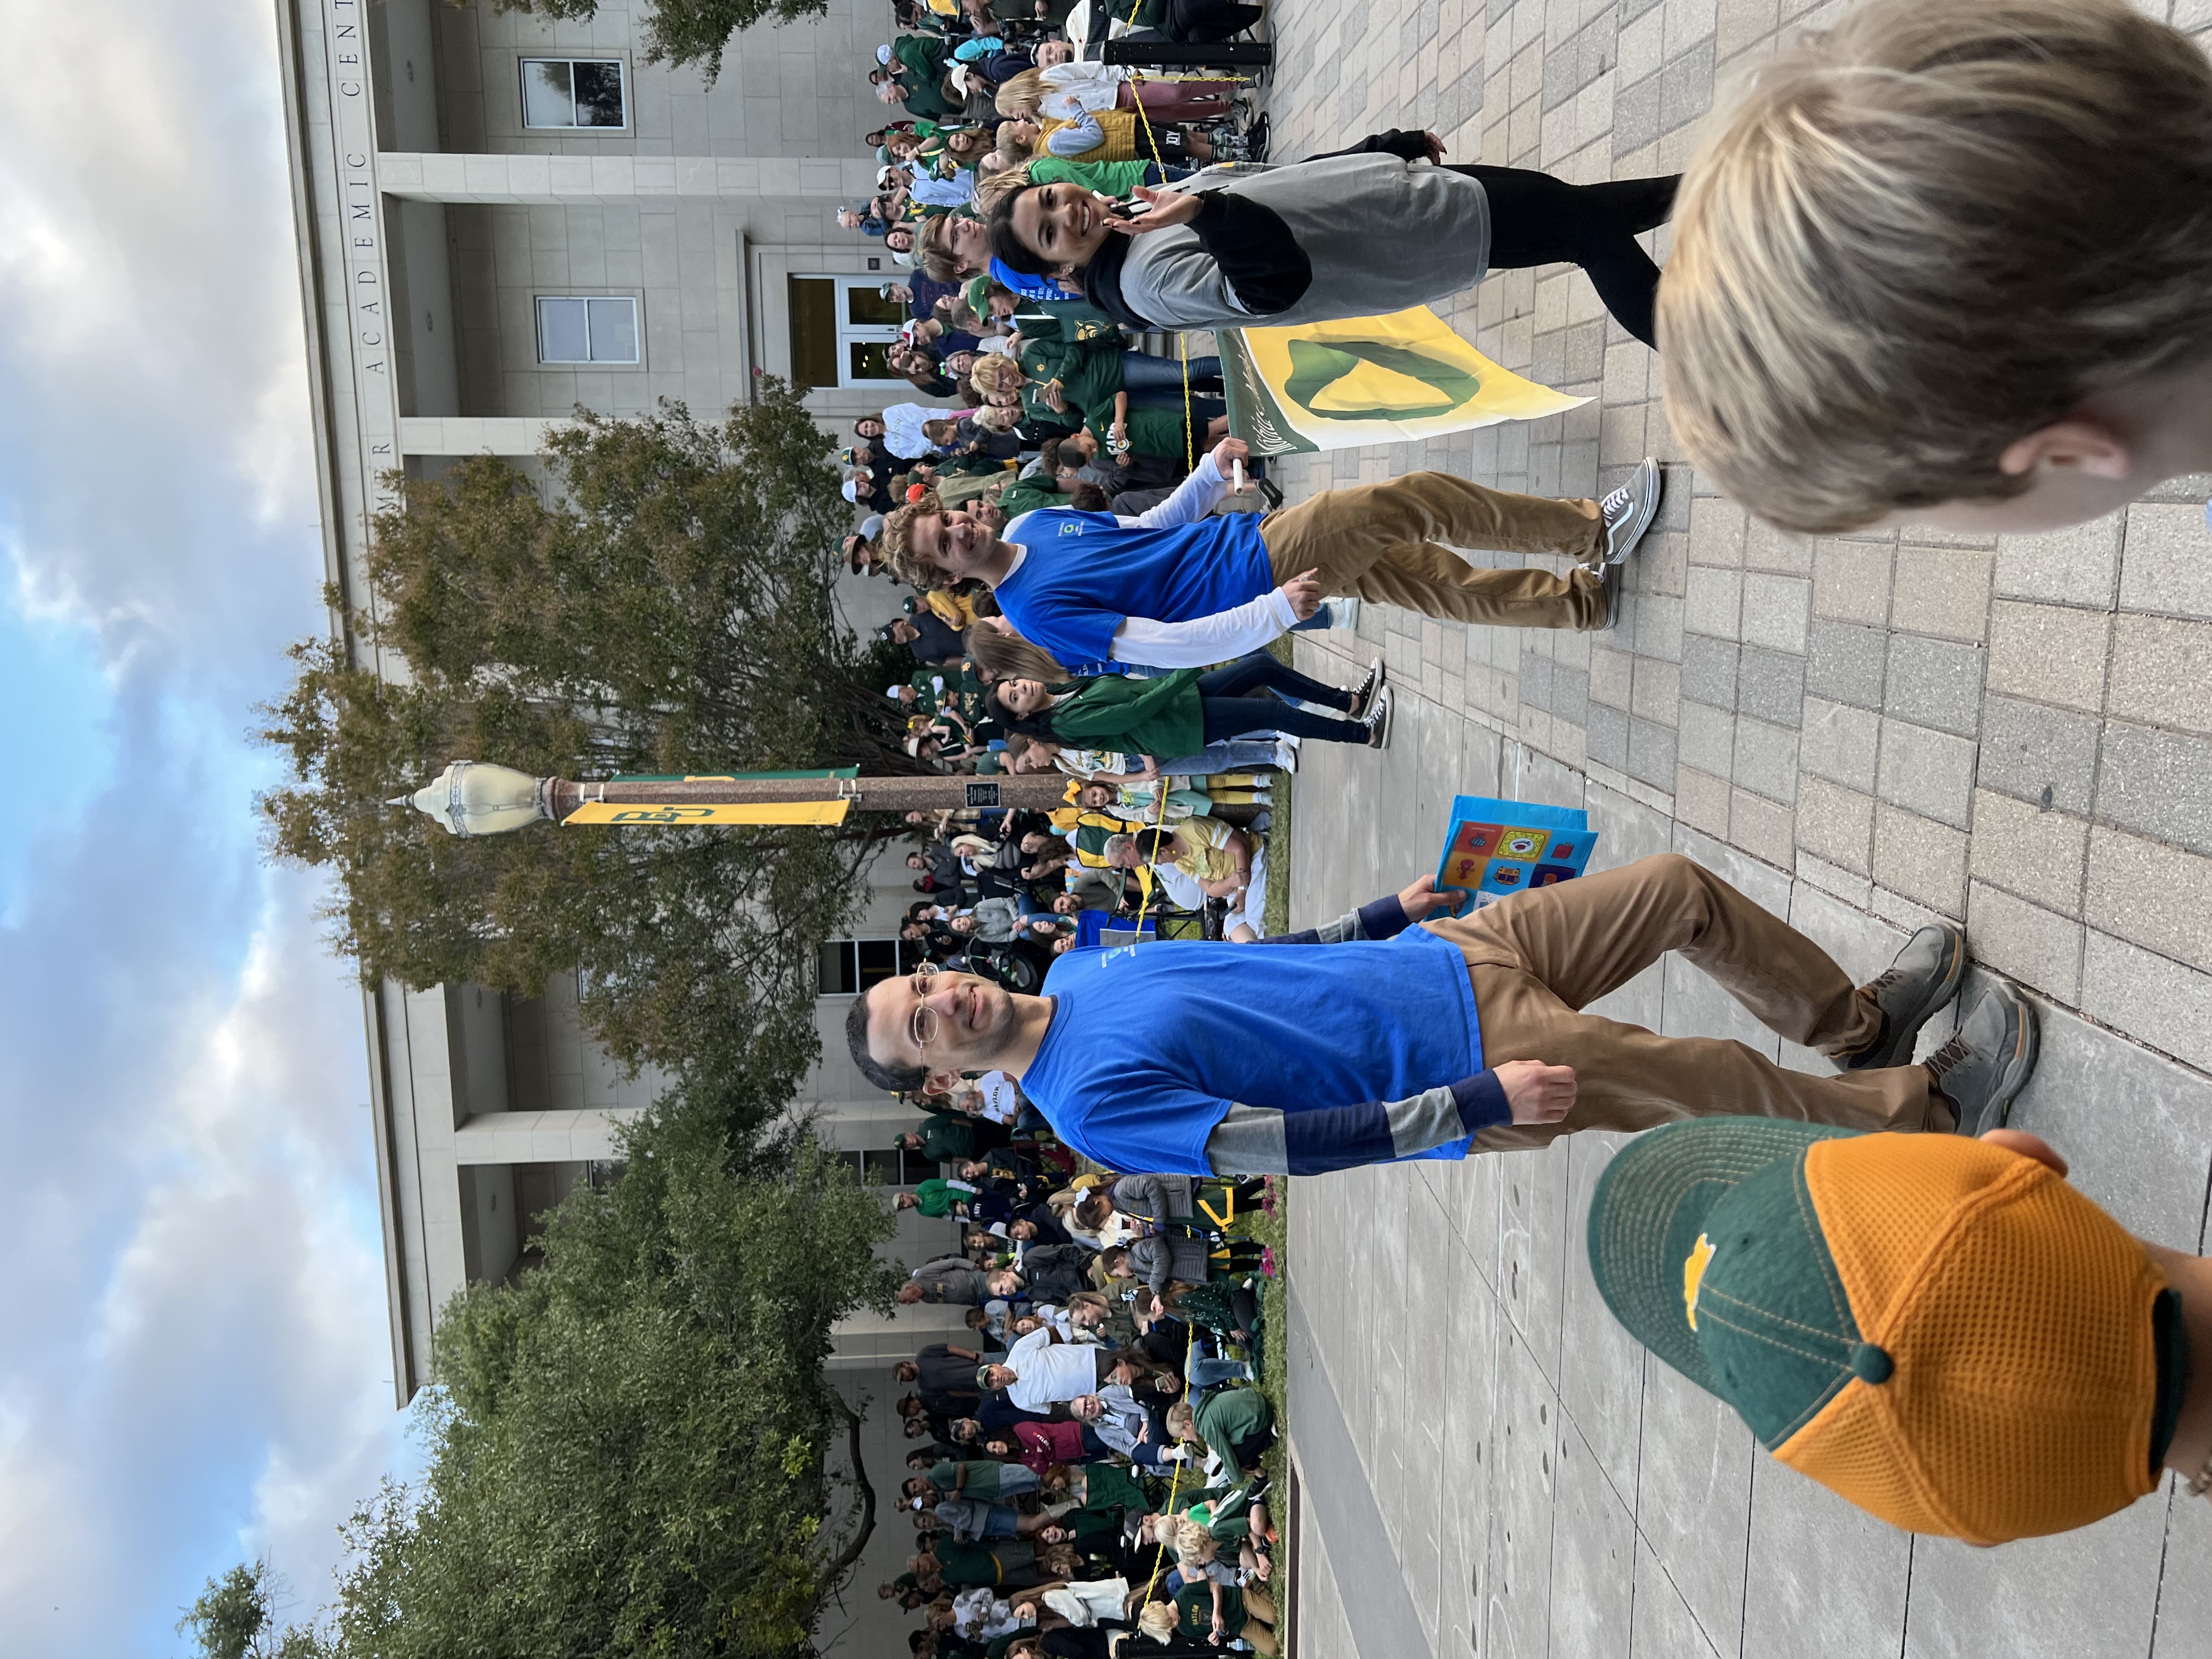 Members and organizers of the Mobius Math Society pose for a photograph on the day of the 2022 Baylor Homecoming Parade.